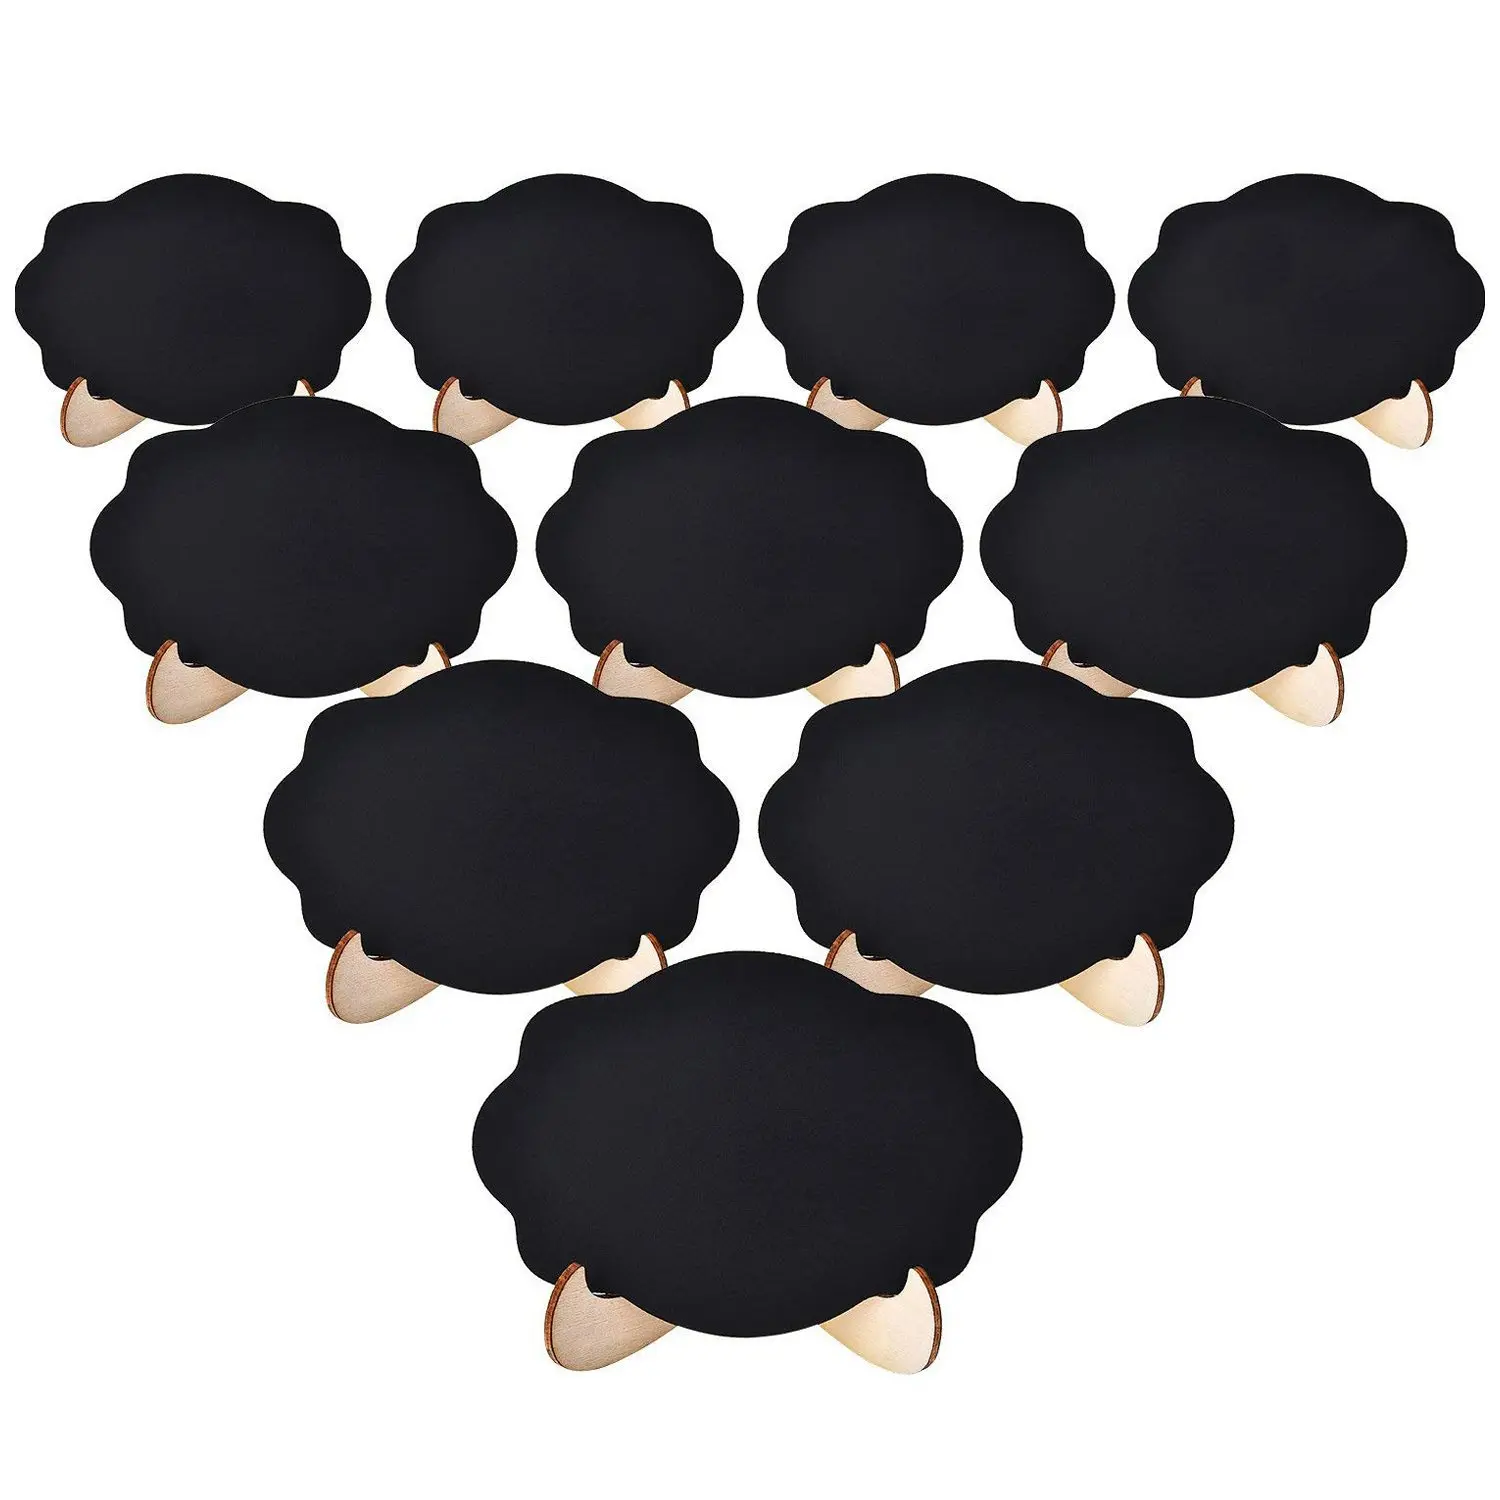 Mini Chalkboard Signs Easel Stand -10Pcs Reusable Mini Chalkboard Signs Tags for Event Decoration Tags Wedding Signs Cards Party